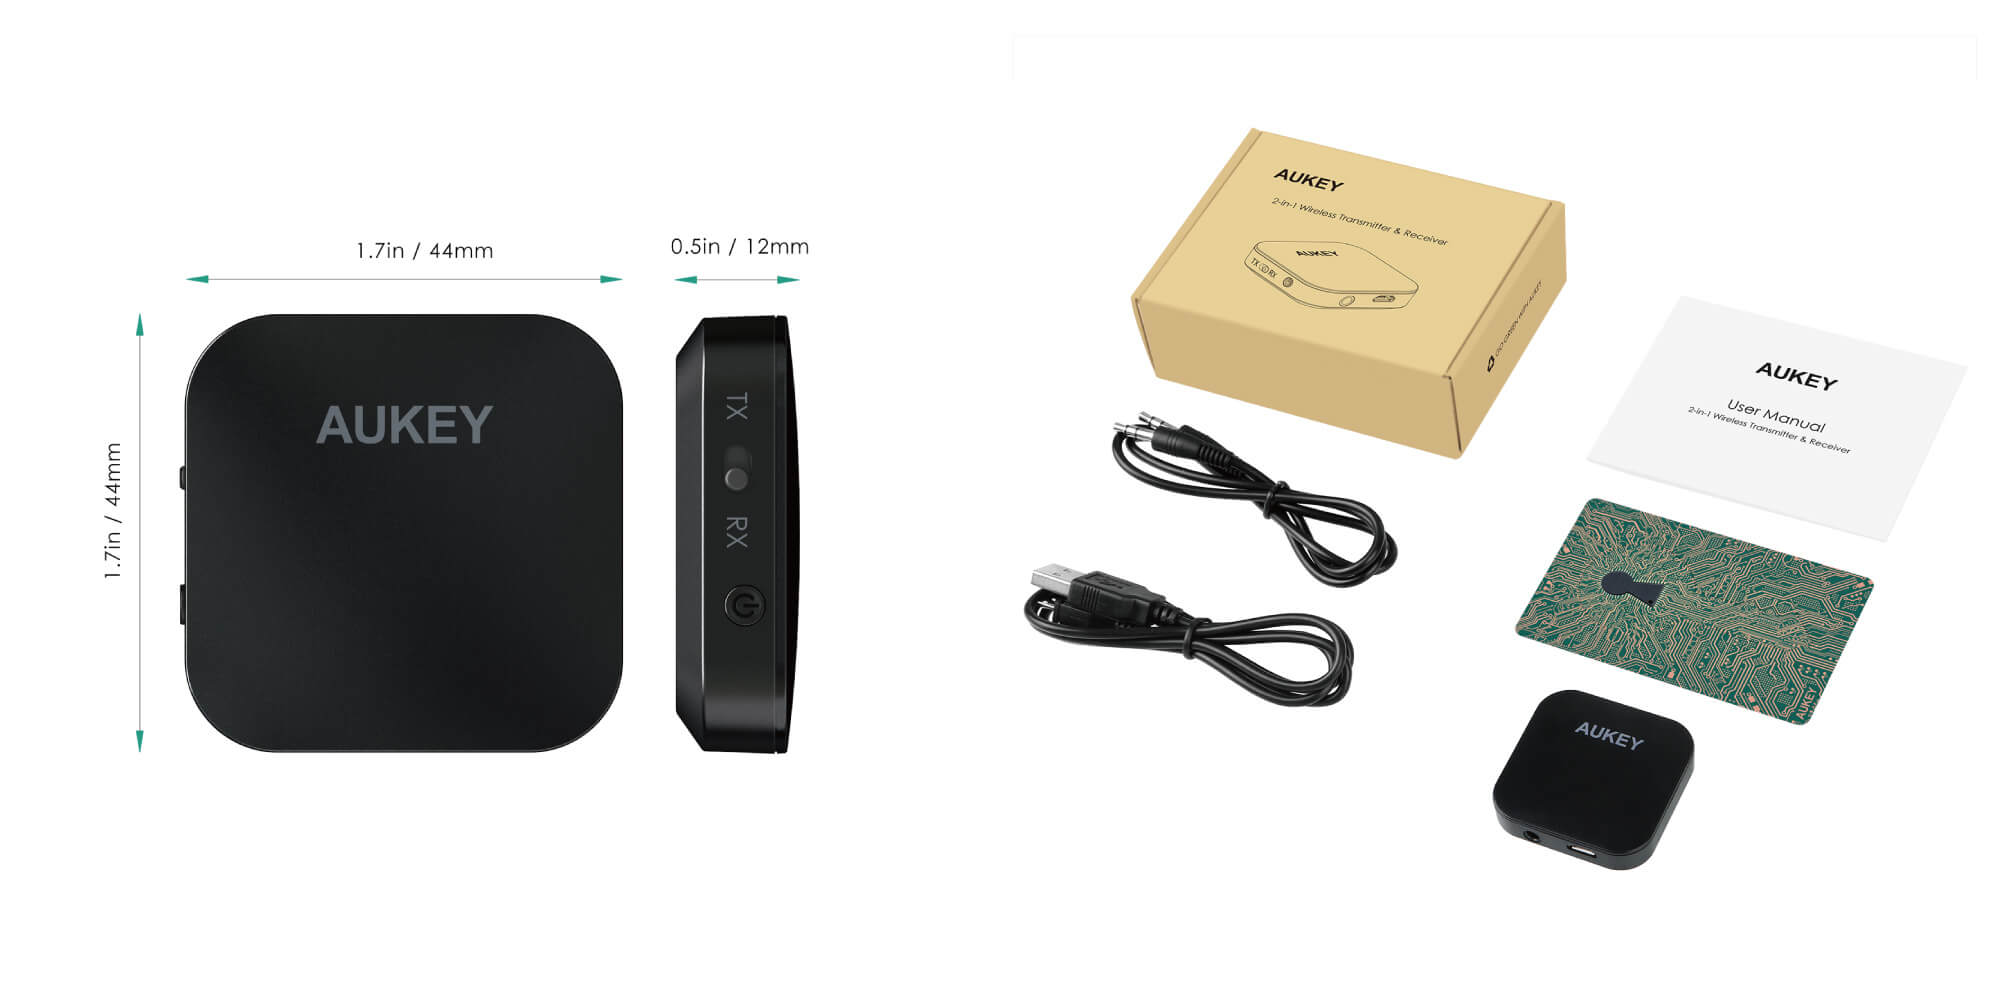 Aukey 2 In 1 Wireless Transmitter And Receiver Br C19